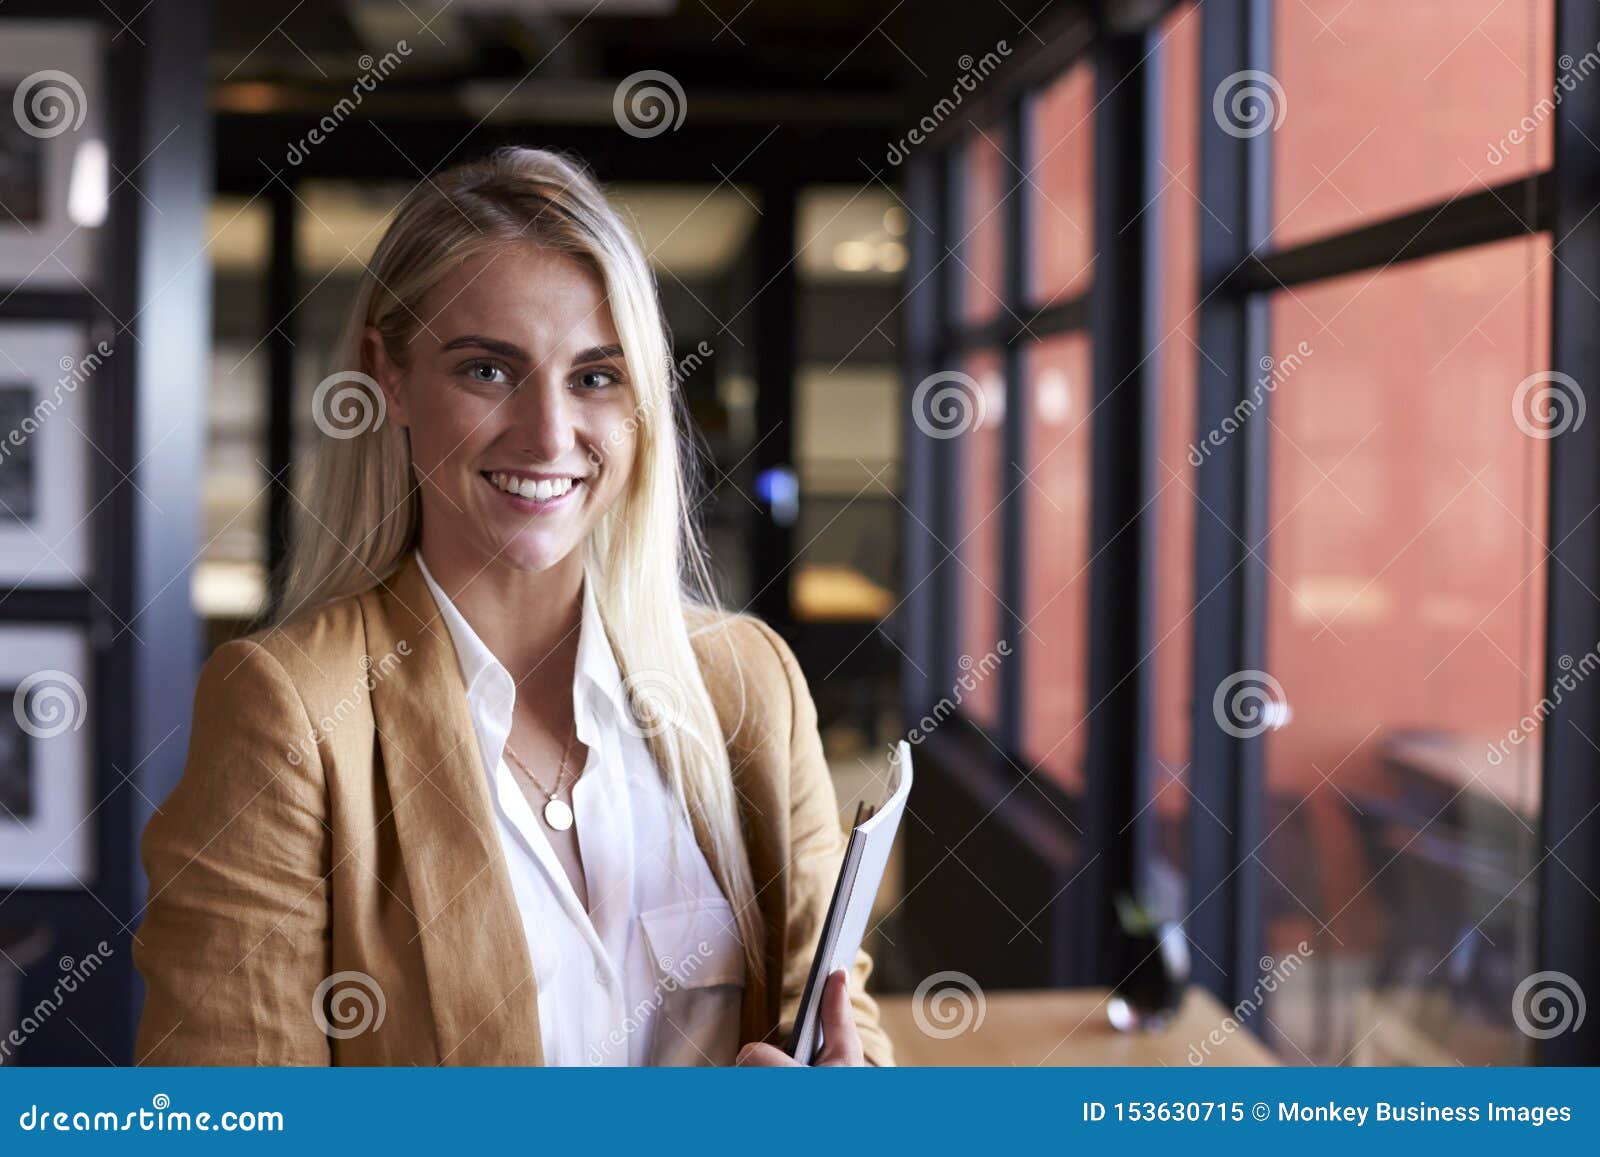 millennial white blonde businesswoman smiling to camera by the window in an office, close up